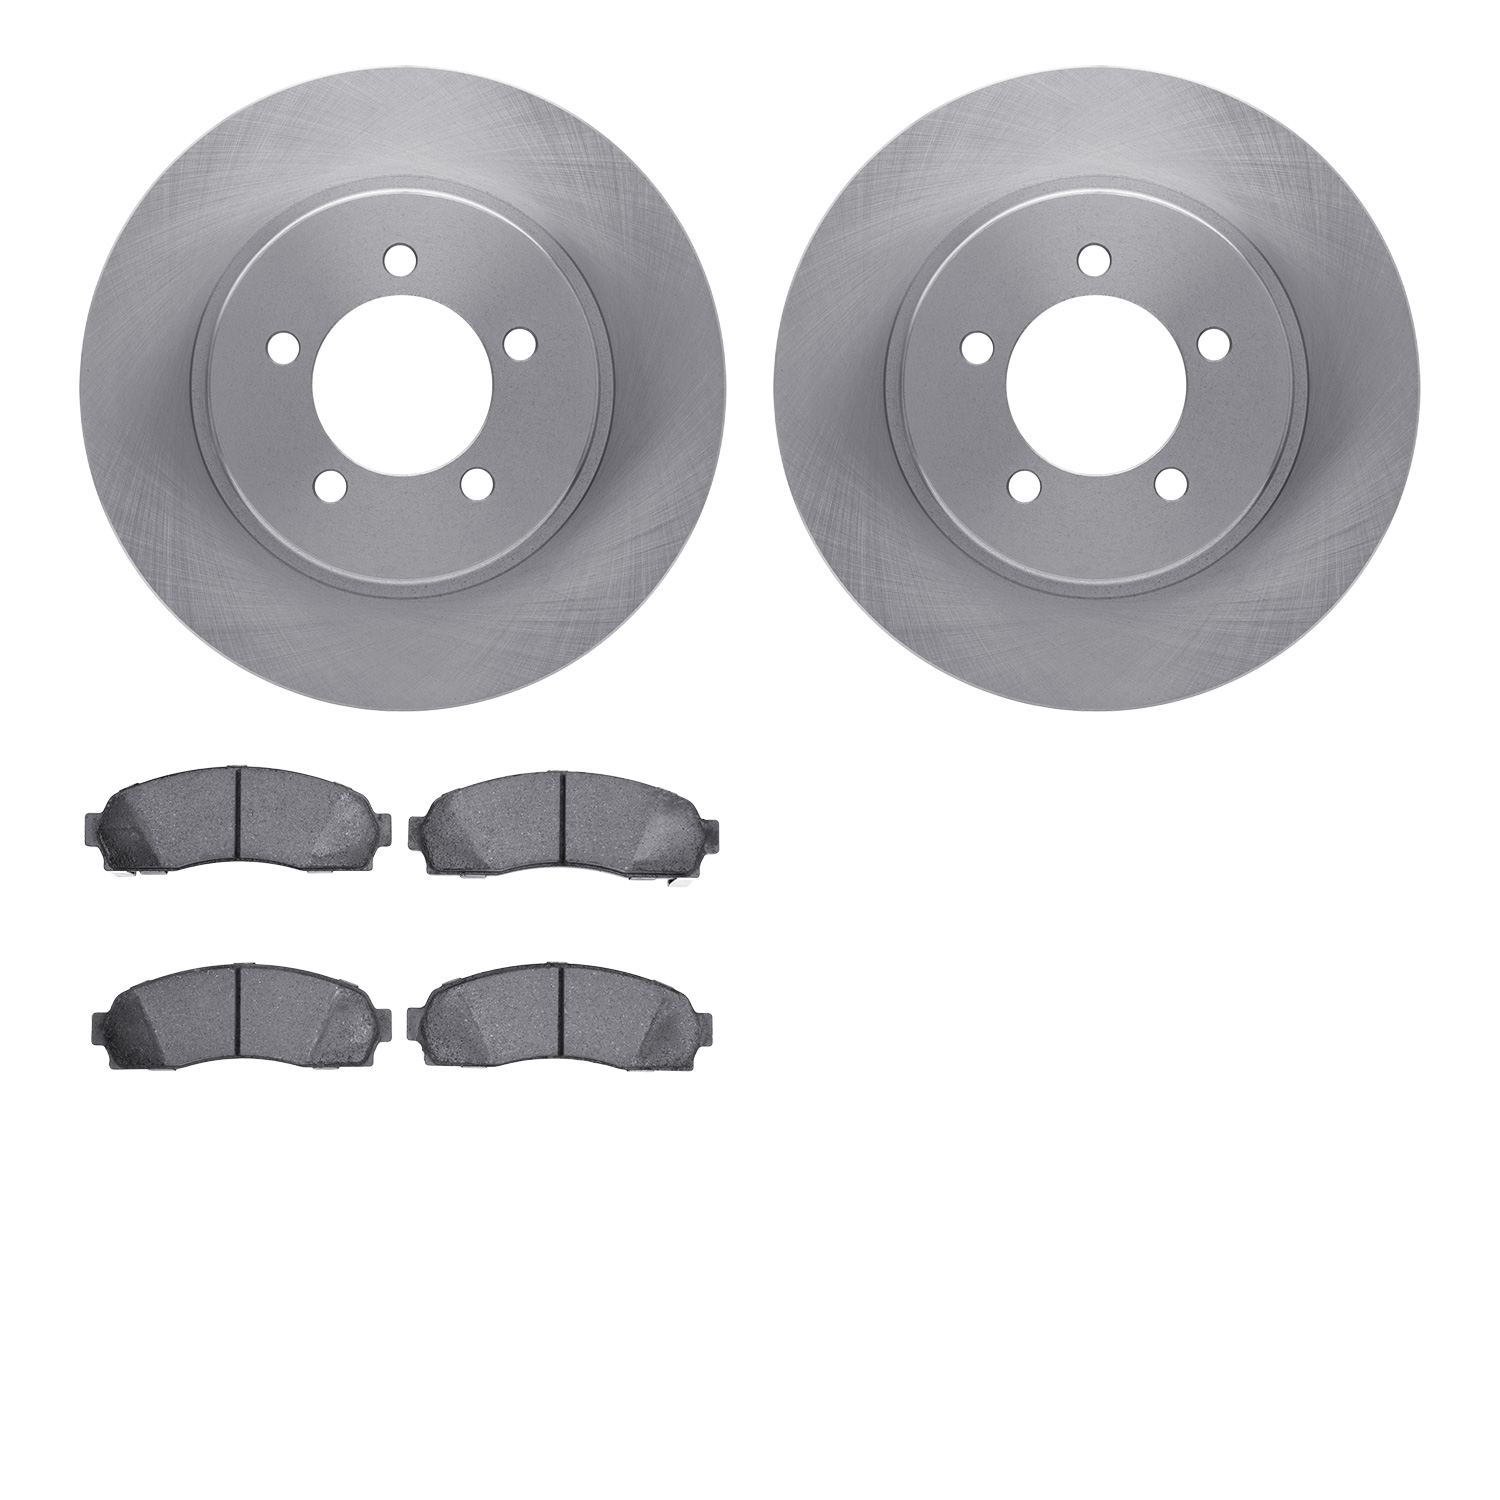 6402-54194 Brake Rotors with Ultimate-Duty Brake Pads, 2002-2005 Ford/Lincoln/Mercury/Mazda, Position: Front